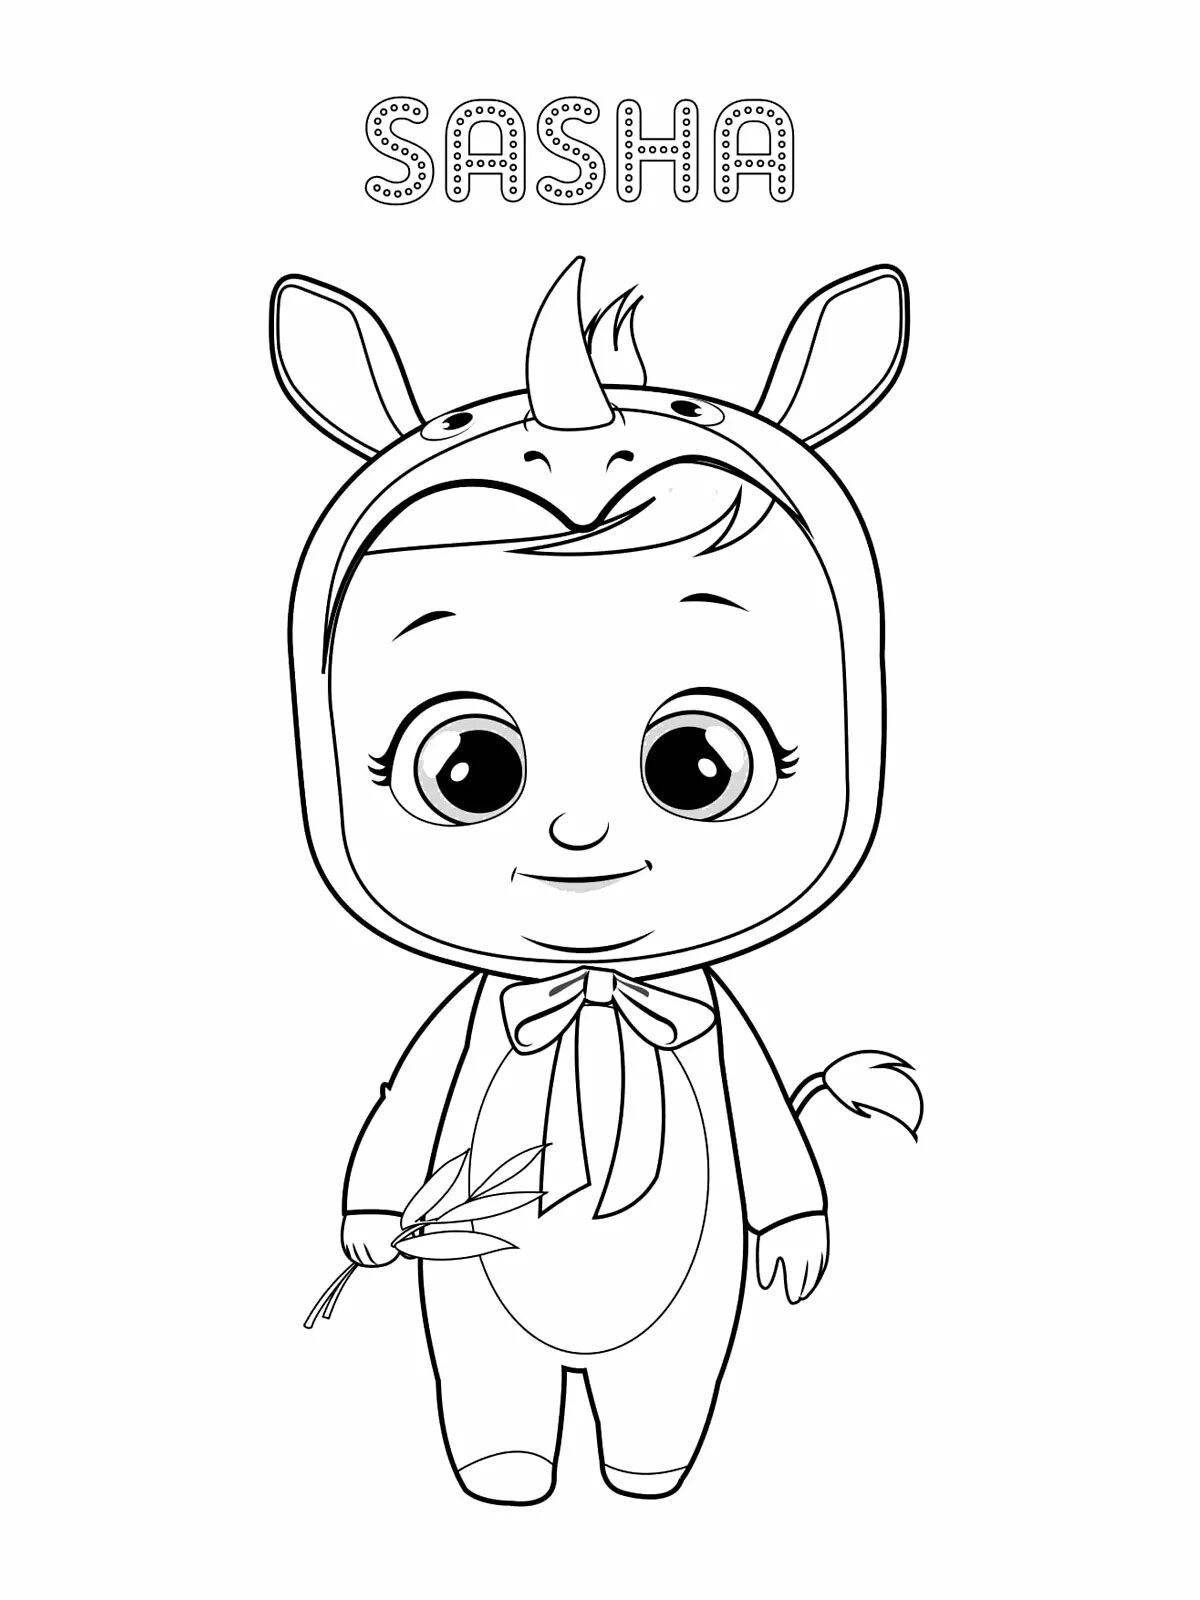 Glorious kreis baby coloring page